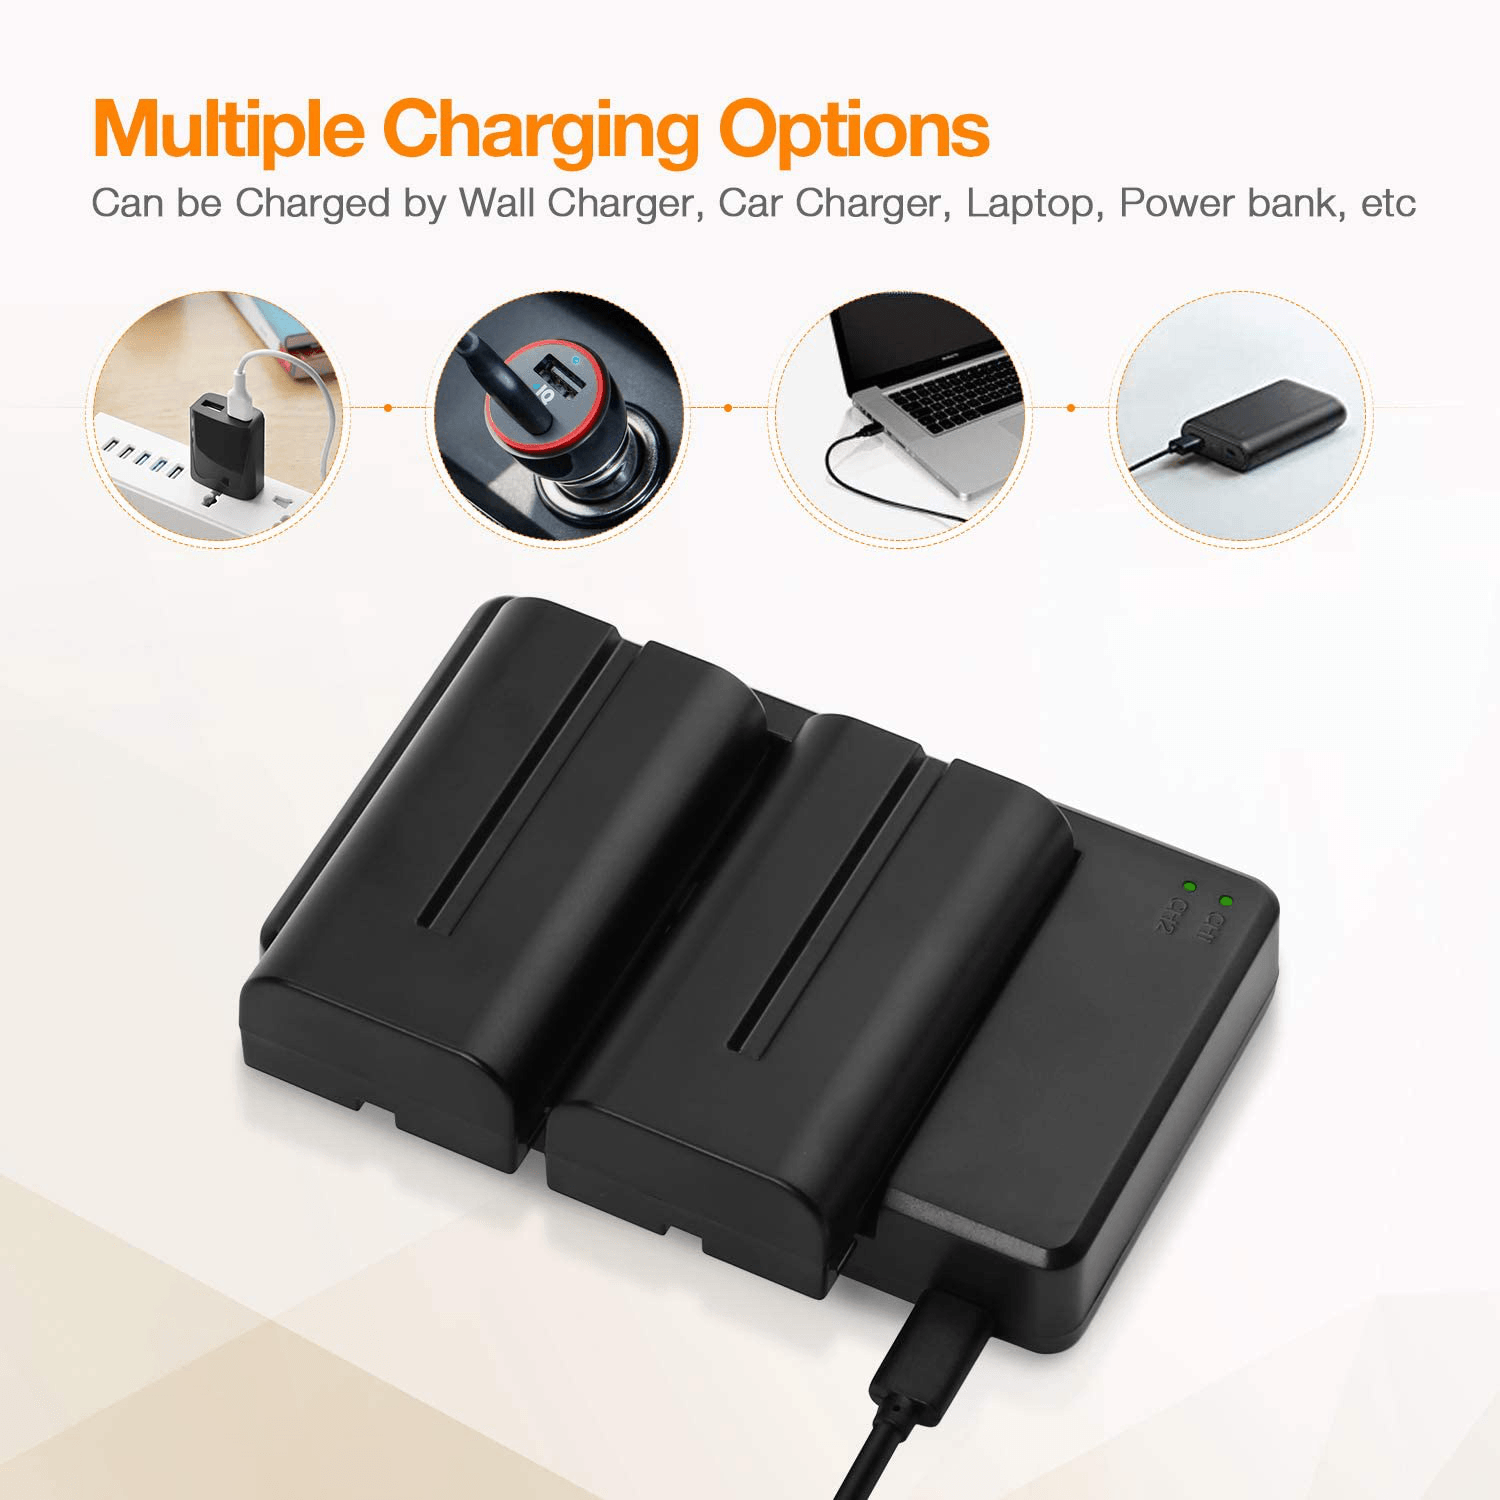 can charge batteries by car, power bank, wall charger, laptop